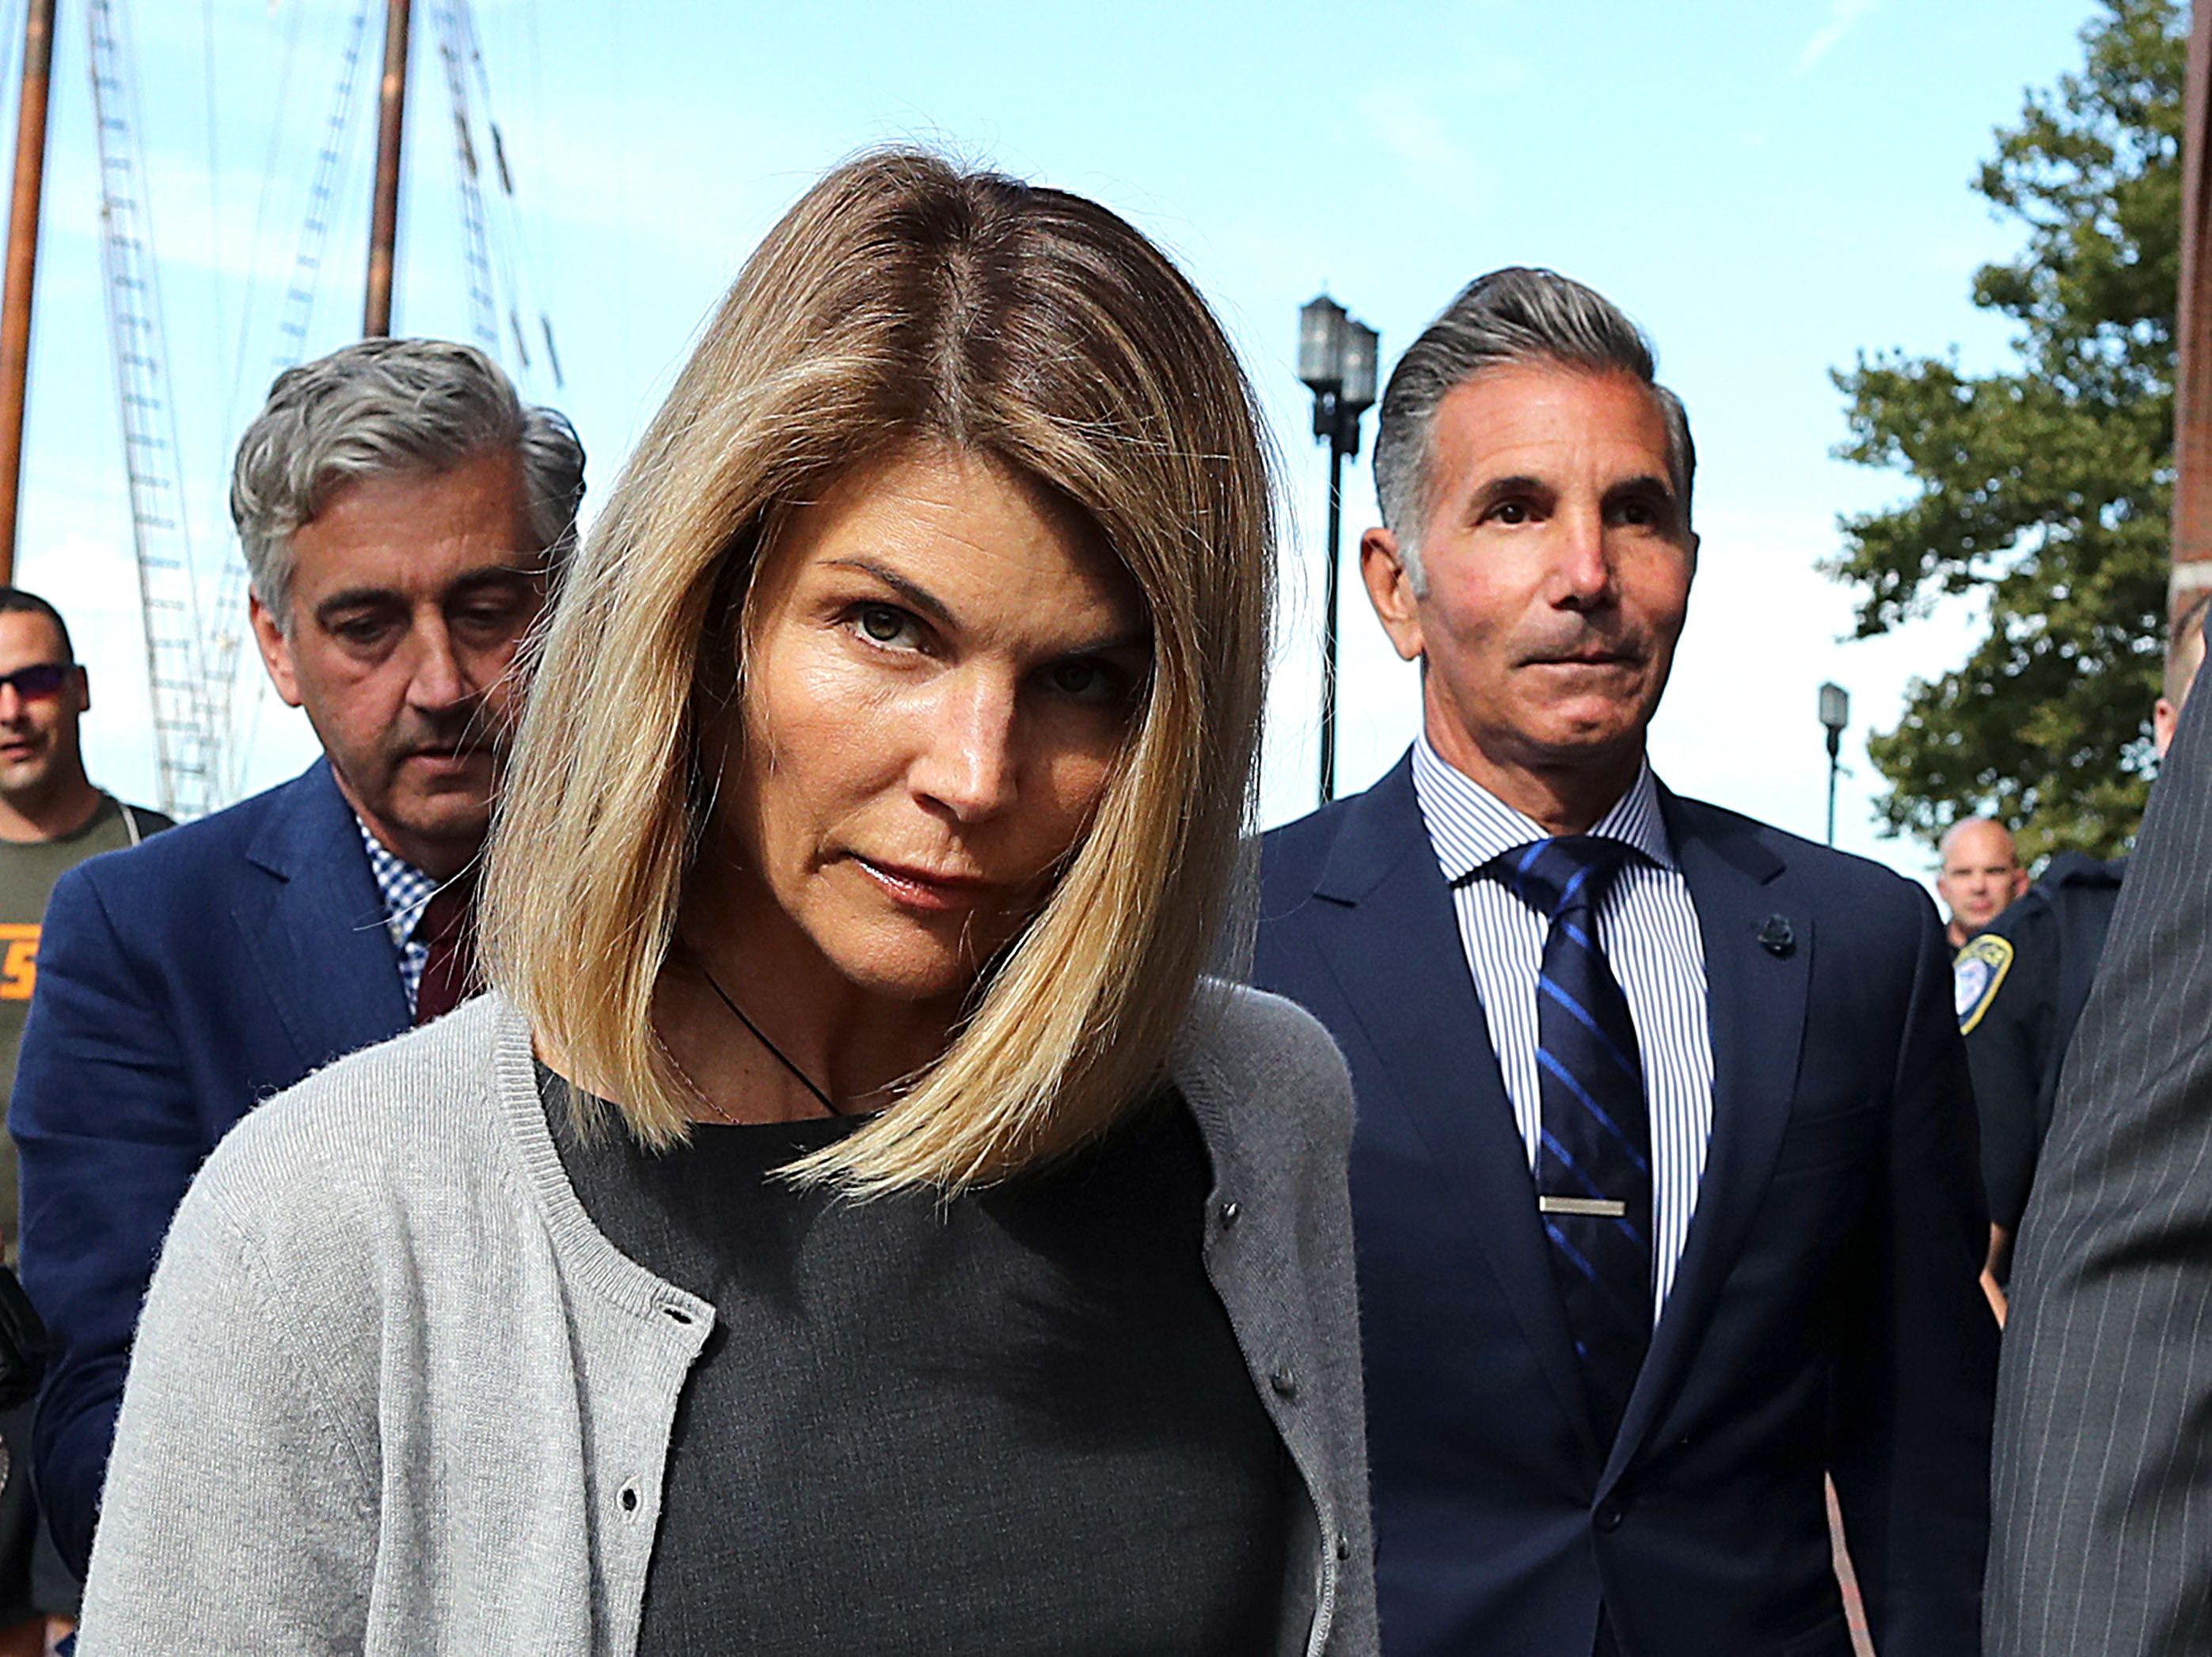 Lori Loughlin and Mossimo Giannulli outside the John Joseph Moakley United States Courthouse in Boston in August 2019 | Source: Getty Images 